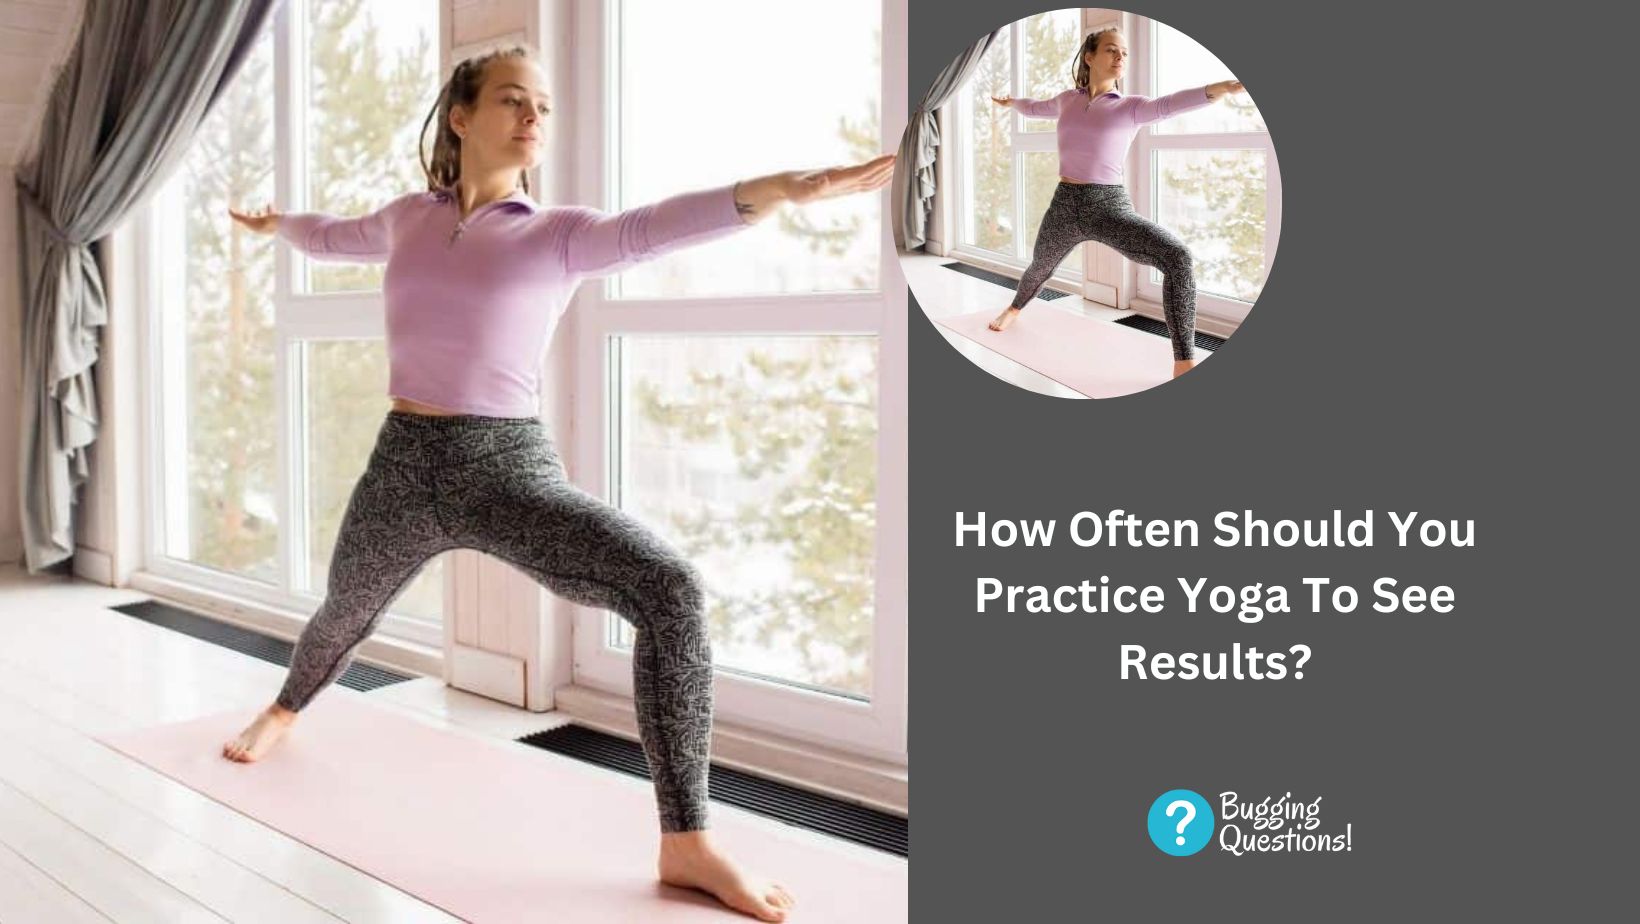 How Often Should You Practice Yoga To See Results?